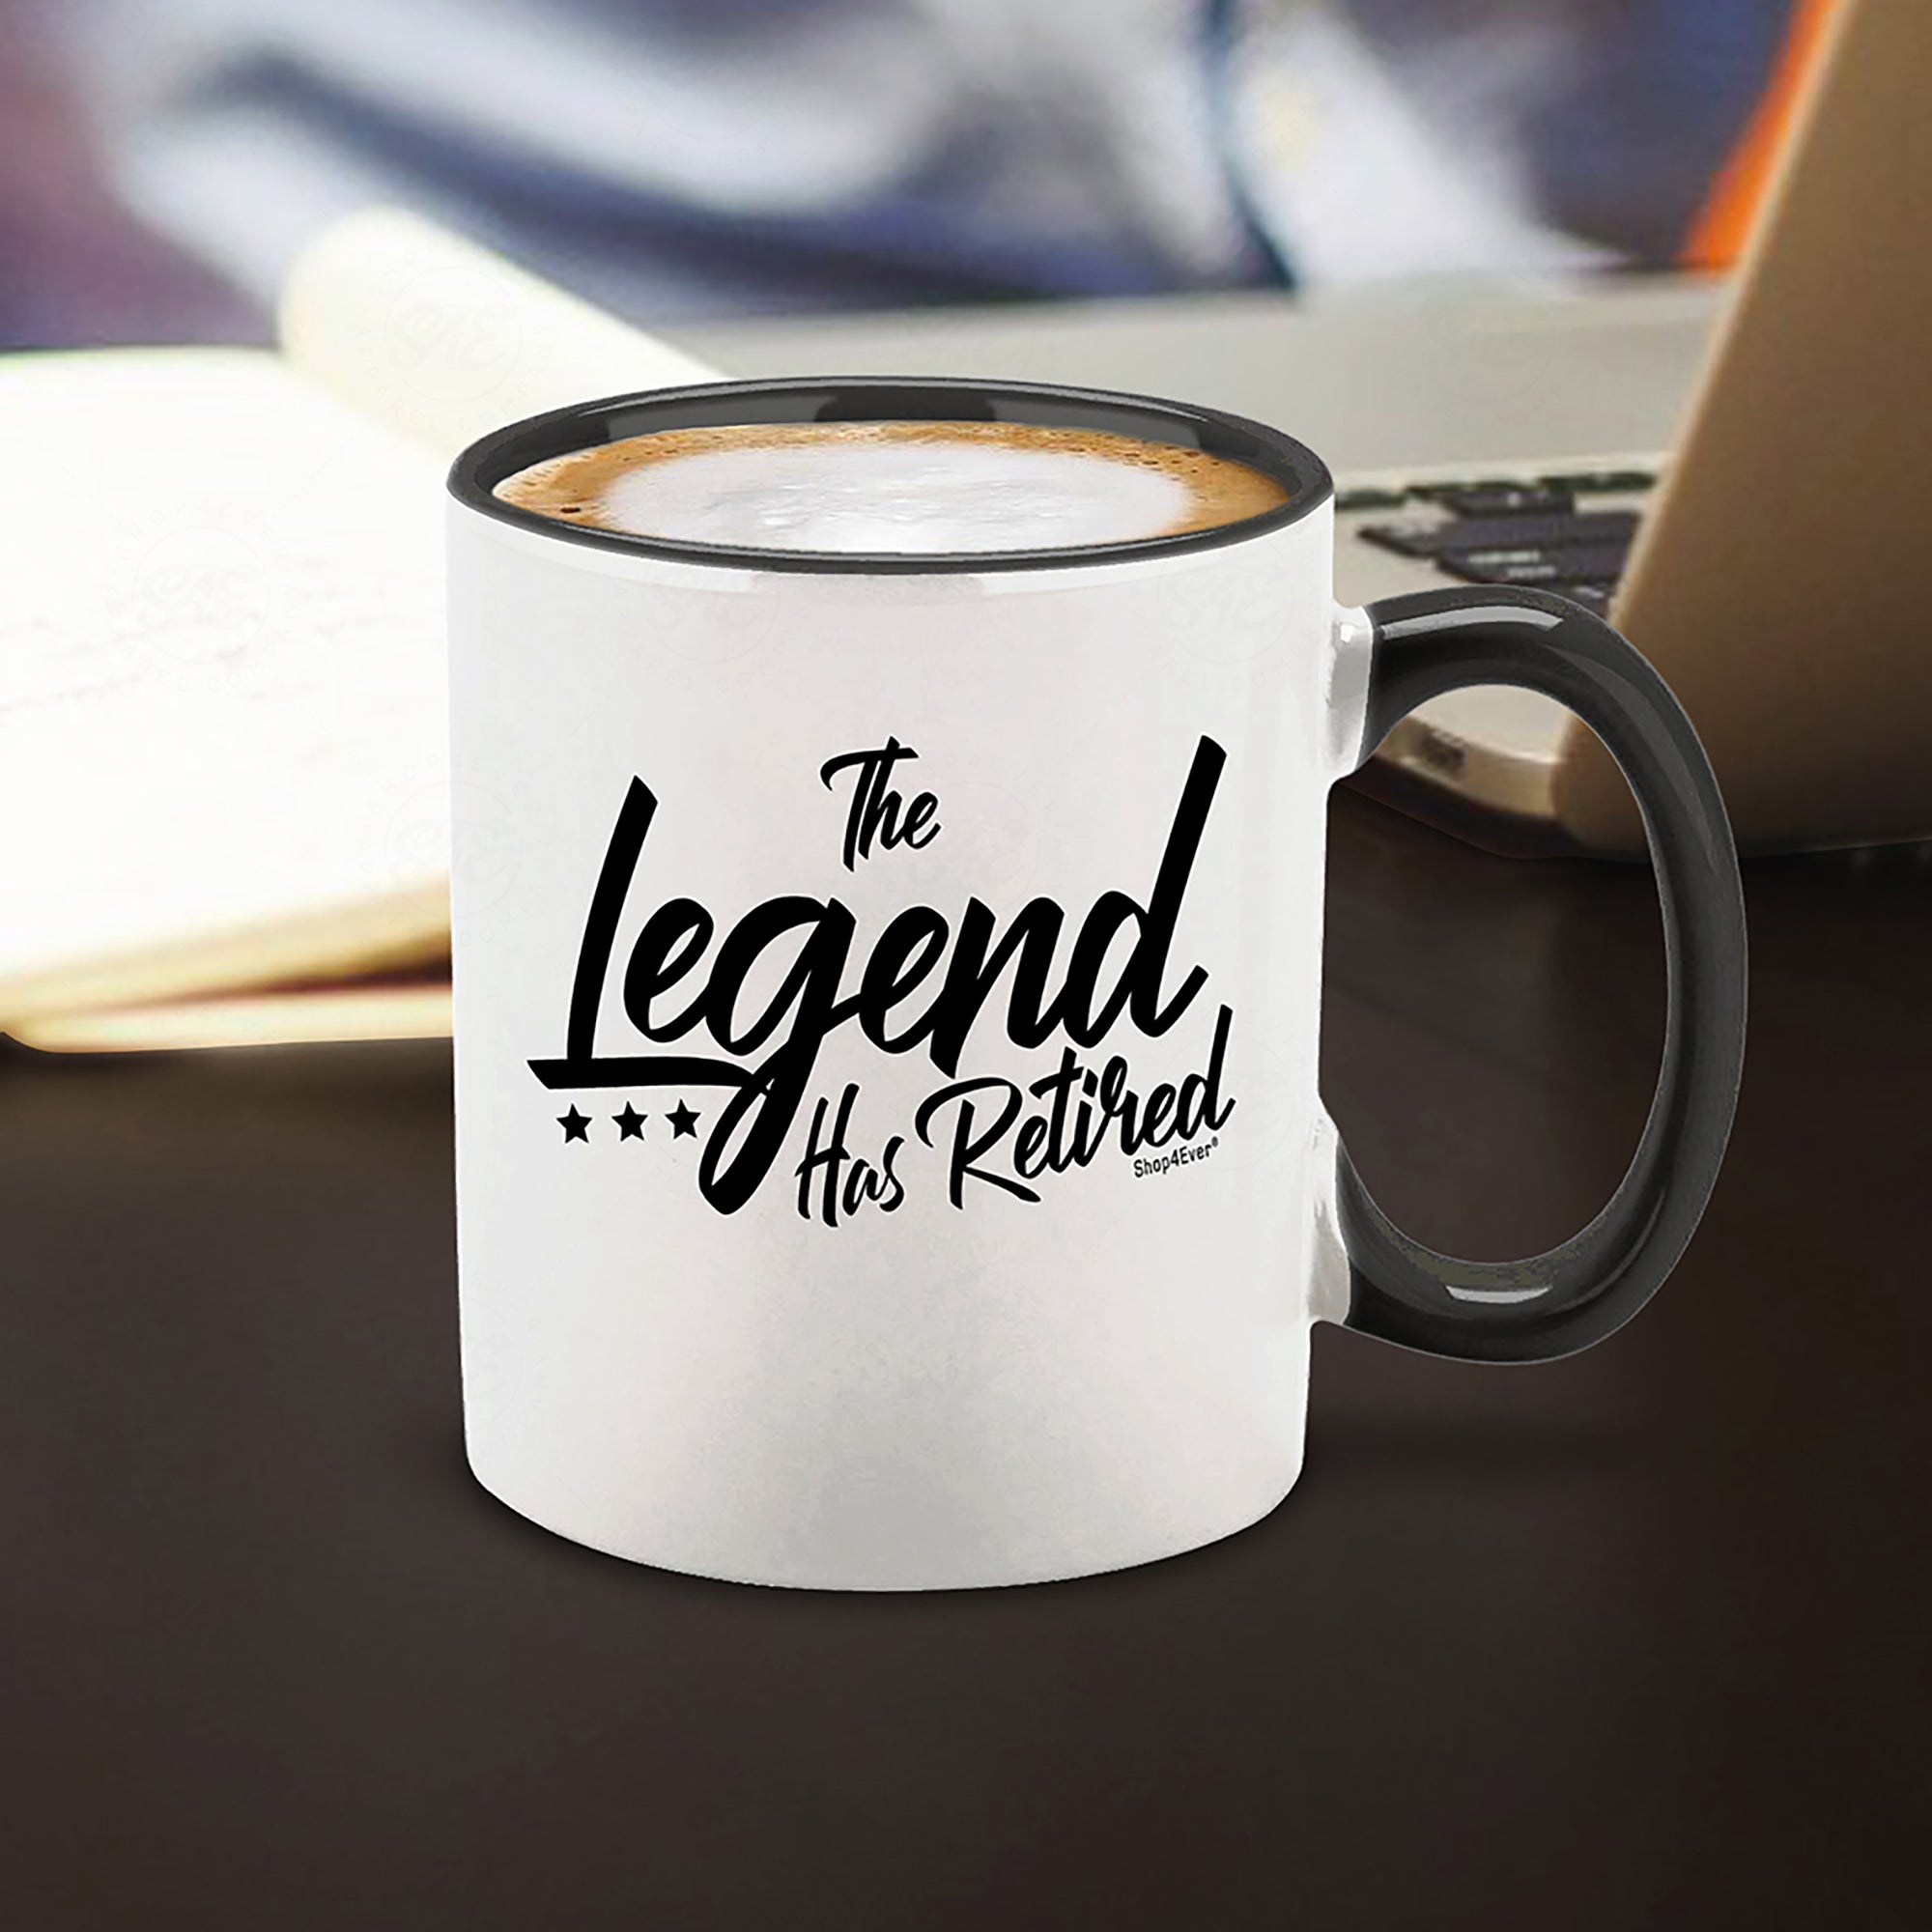 ORIGIN MUGS Tea or Coffee Mug The One The Only The Legend Has Retired  Printed Coffee Mug 11 Oz Ceramic Funny Coffee Cup - Gifts for Husband Wife